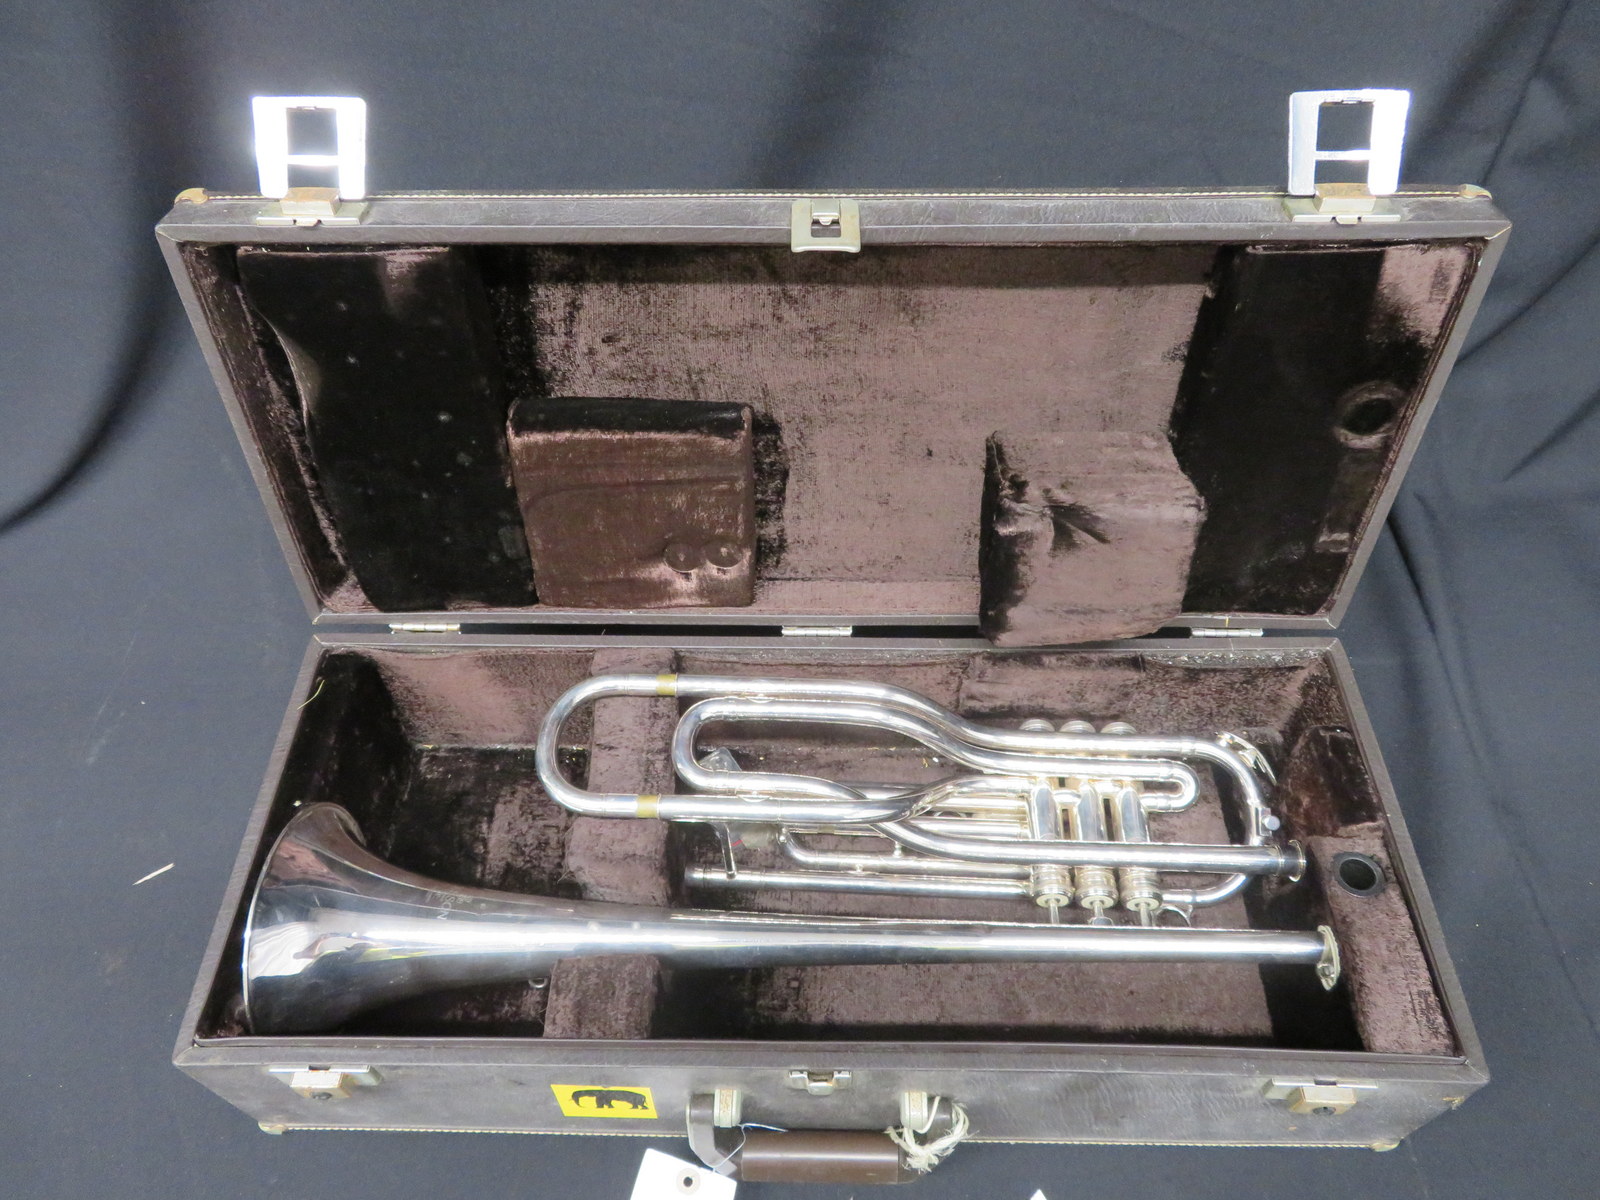 Boosey & Hawkes Besson 700 London tenor fanfare trumpet with case. Serial number: 707-721126.